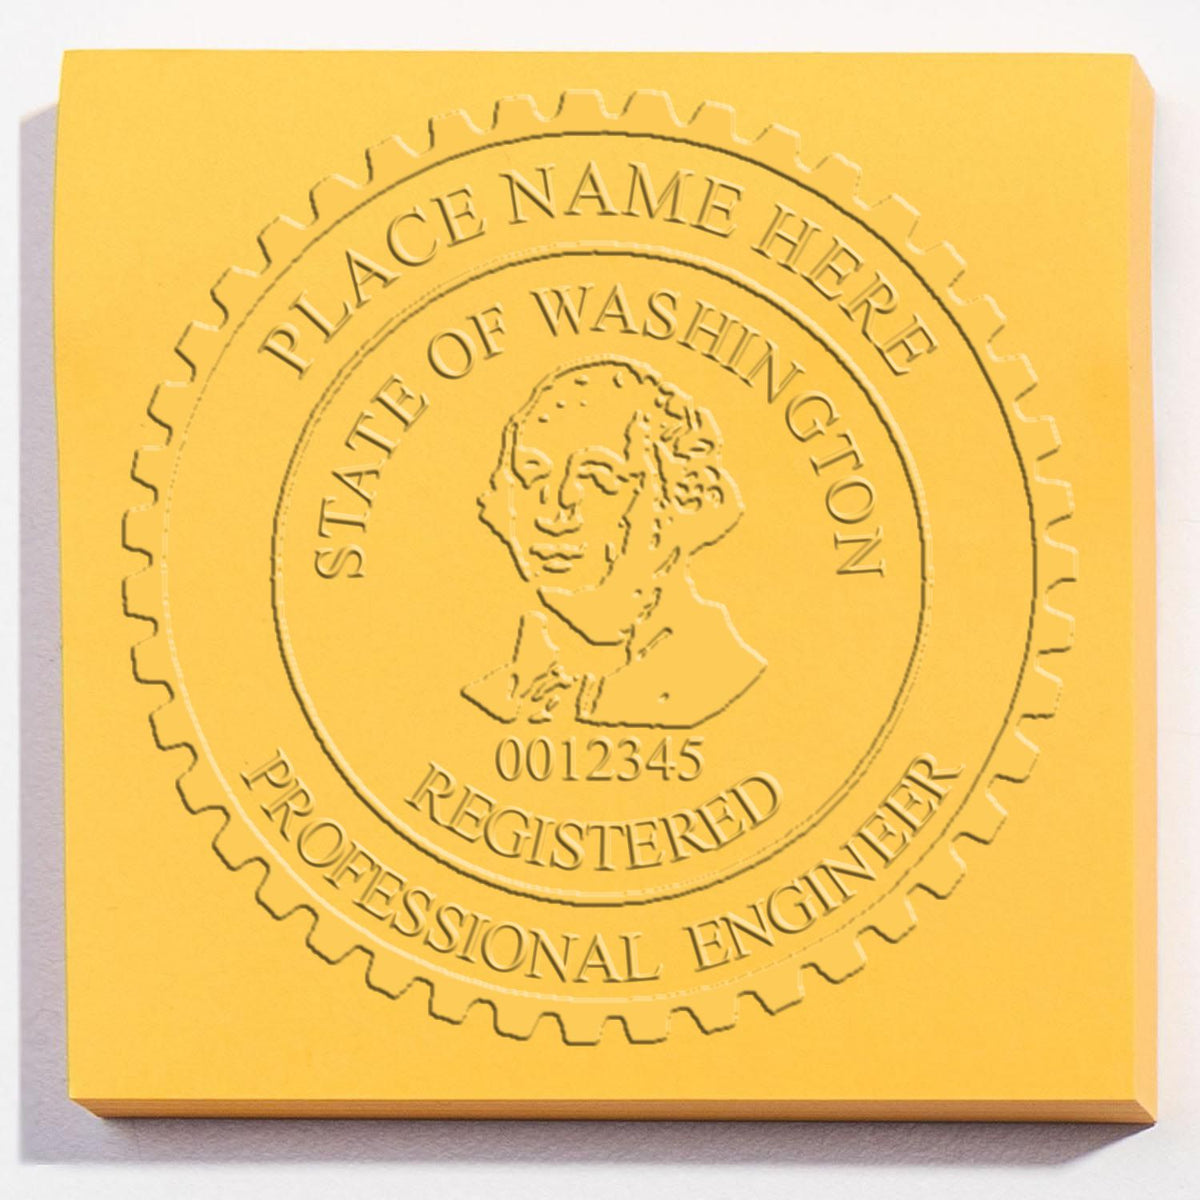 A photograph of the Washington Engineer Desk Seal stamp impression reveals a vivid, professional image of the on paper.